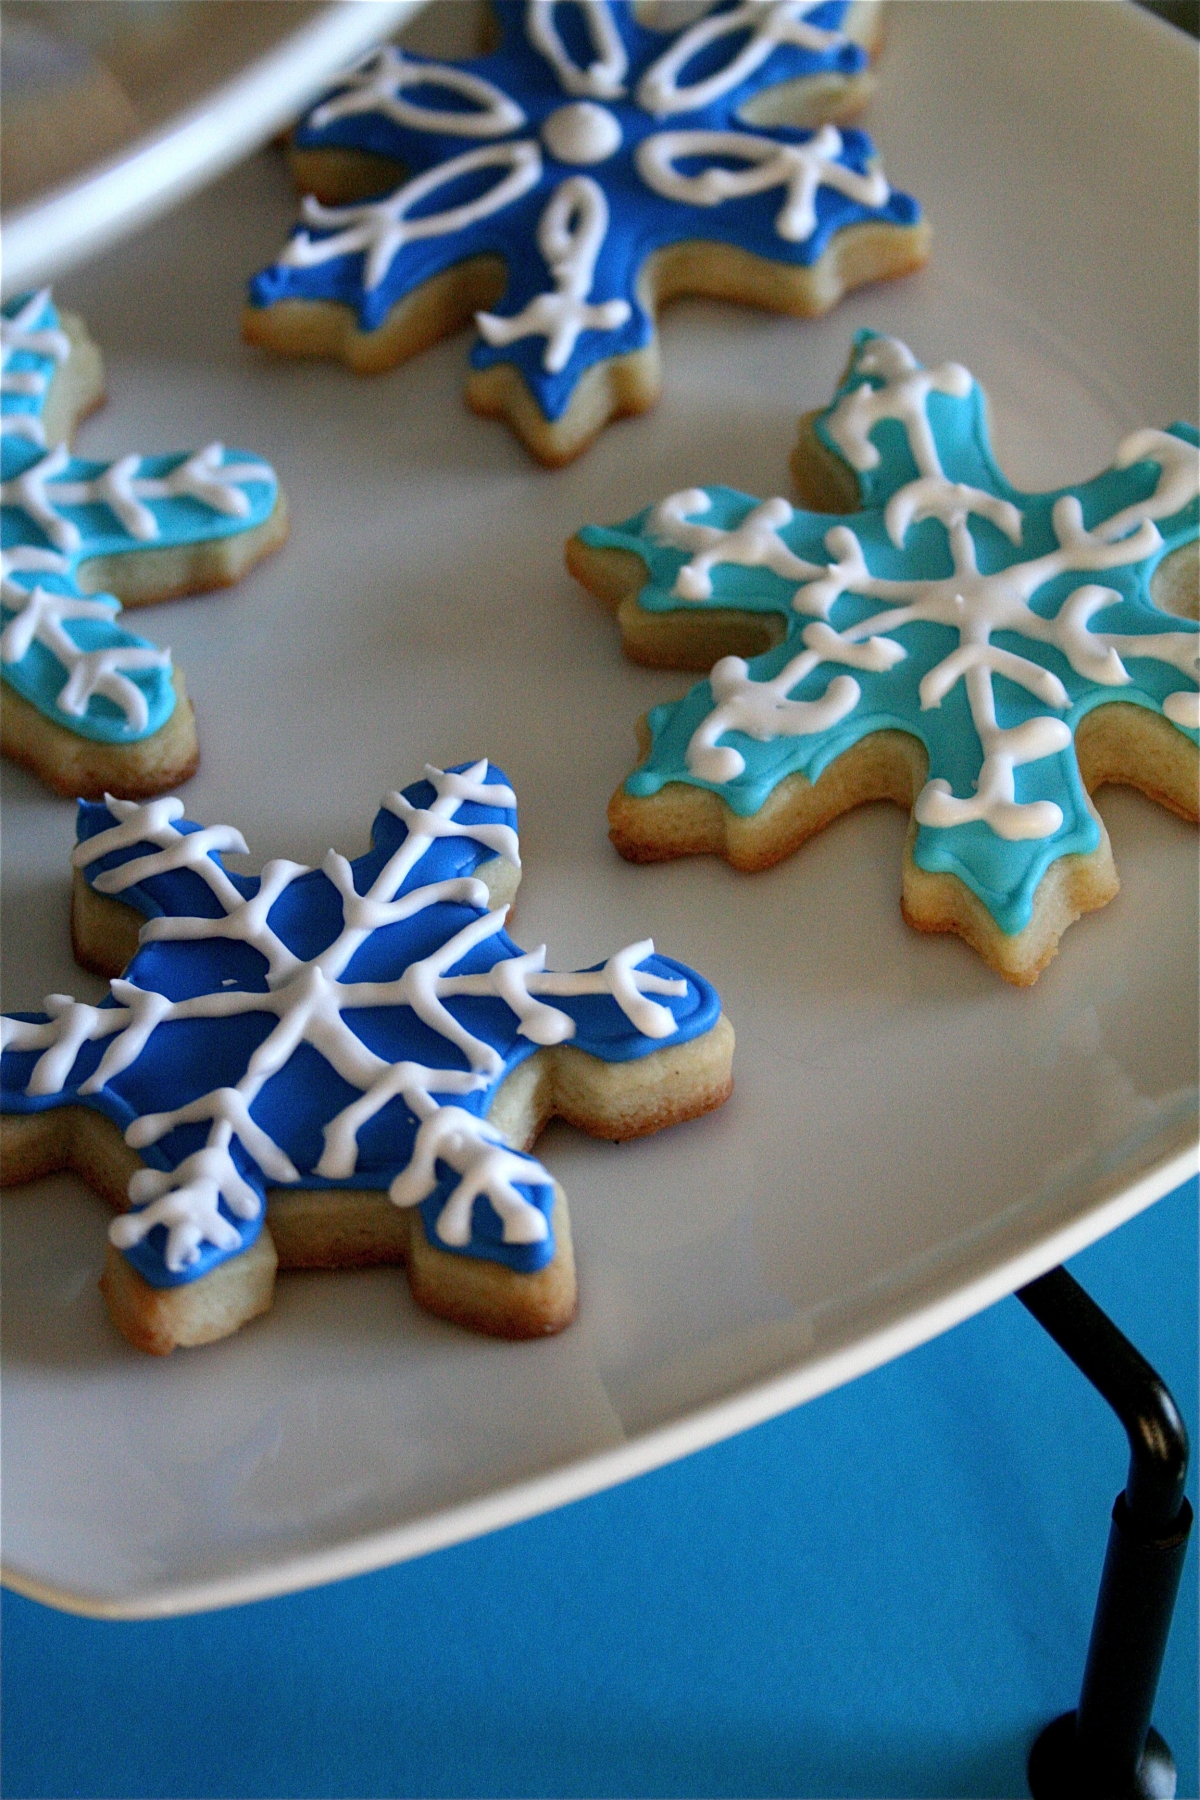 Royal Icing Cookies | The Curvy Carrot